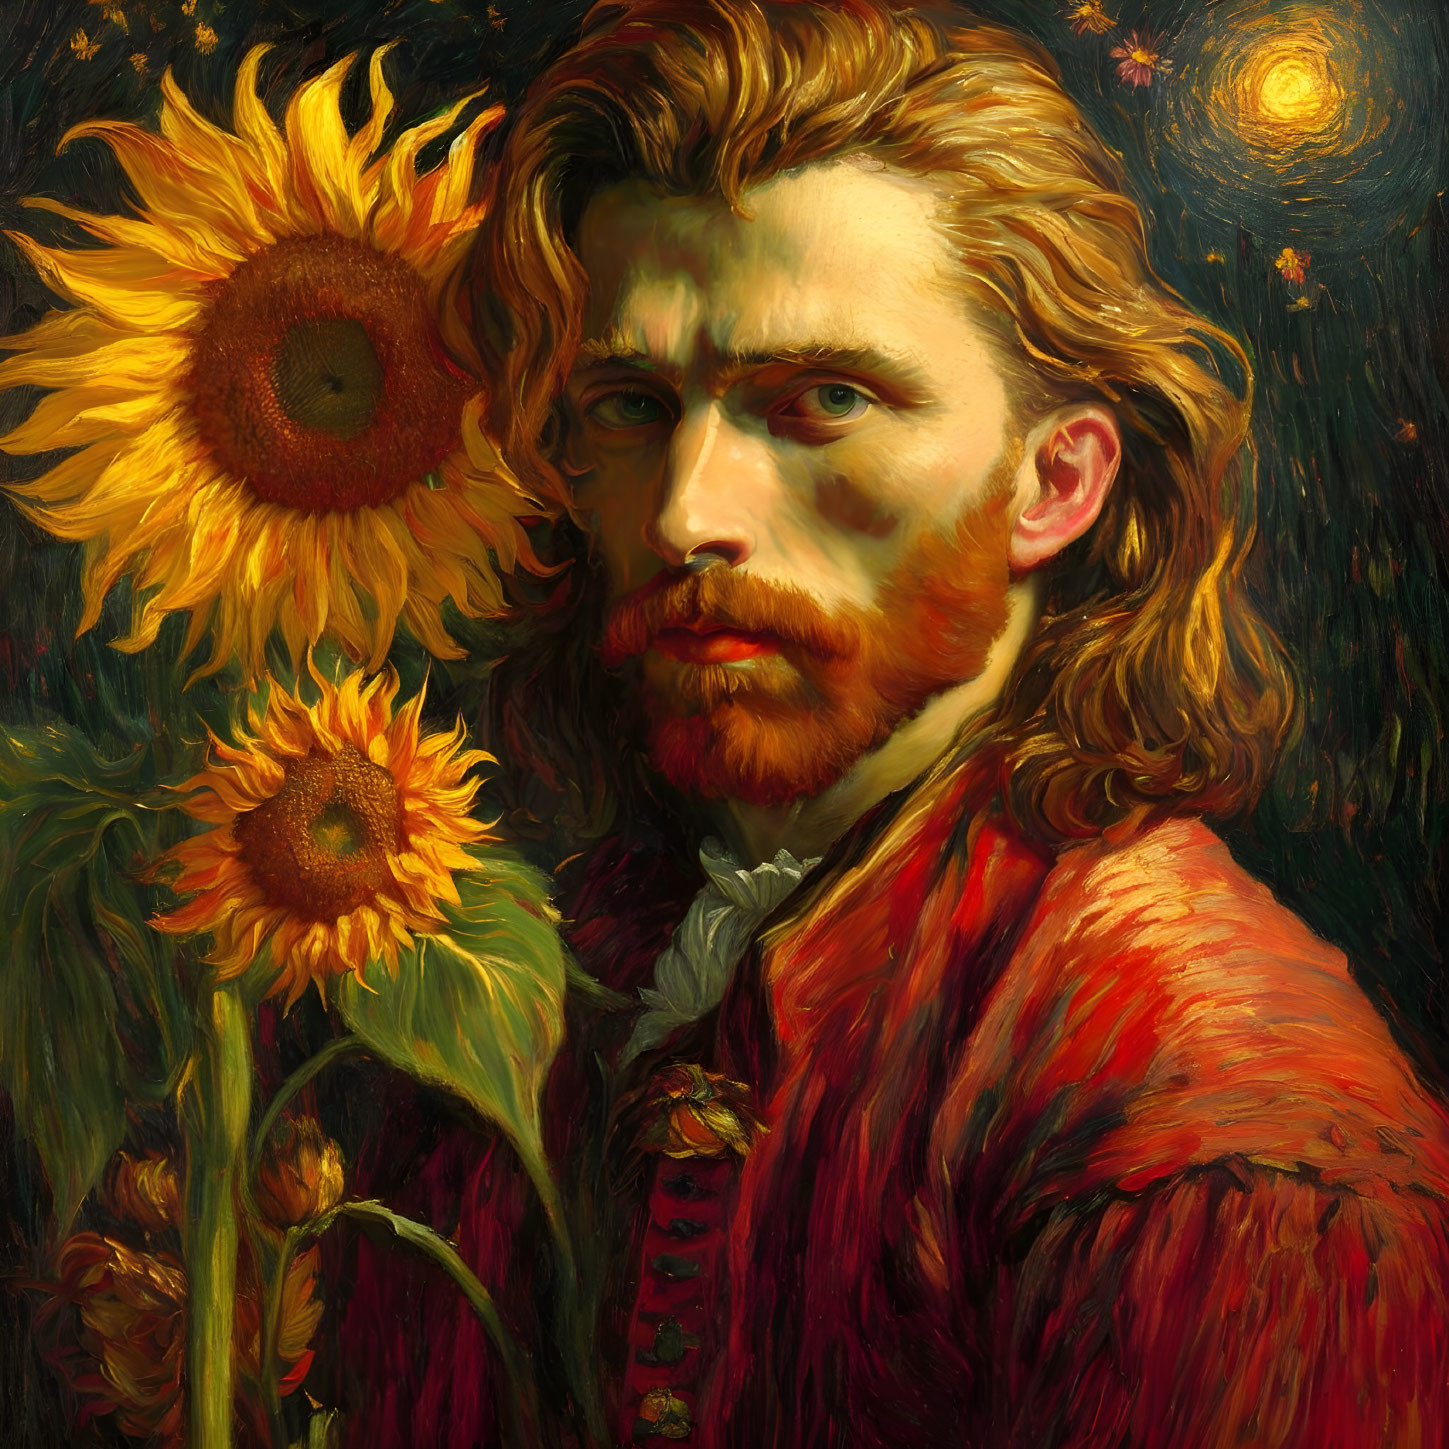 dapper young Vincent and glamorous sunflowers